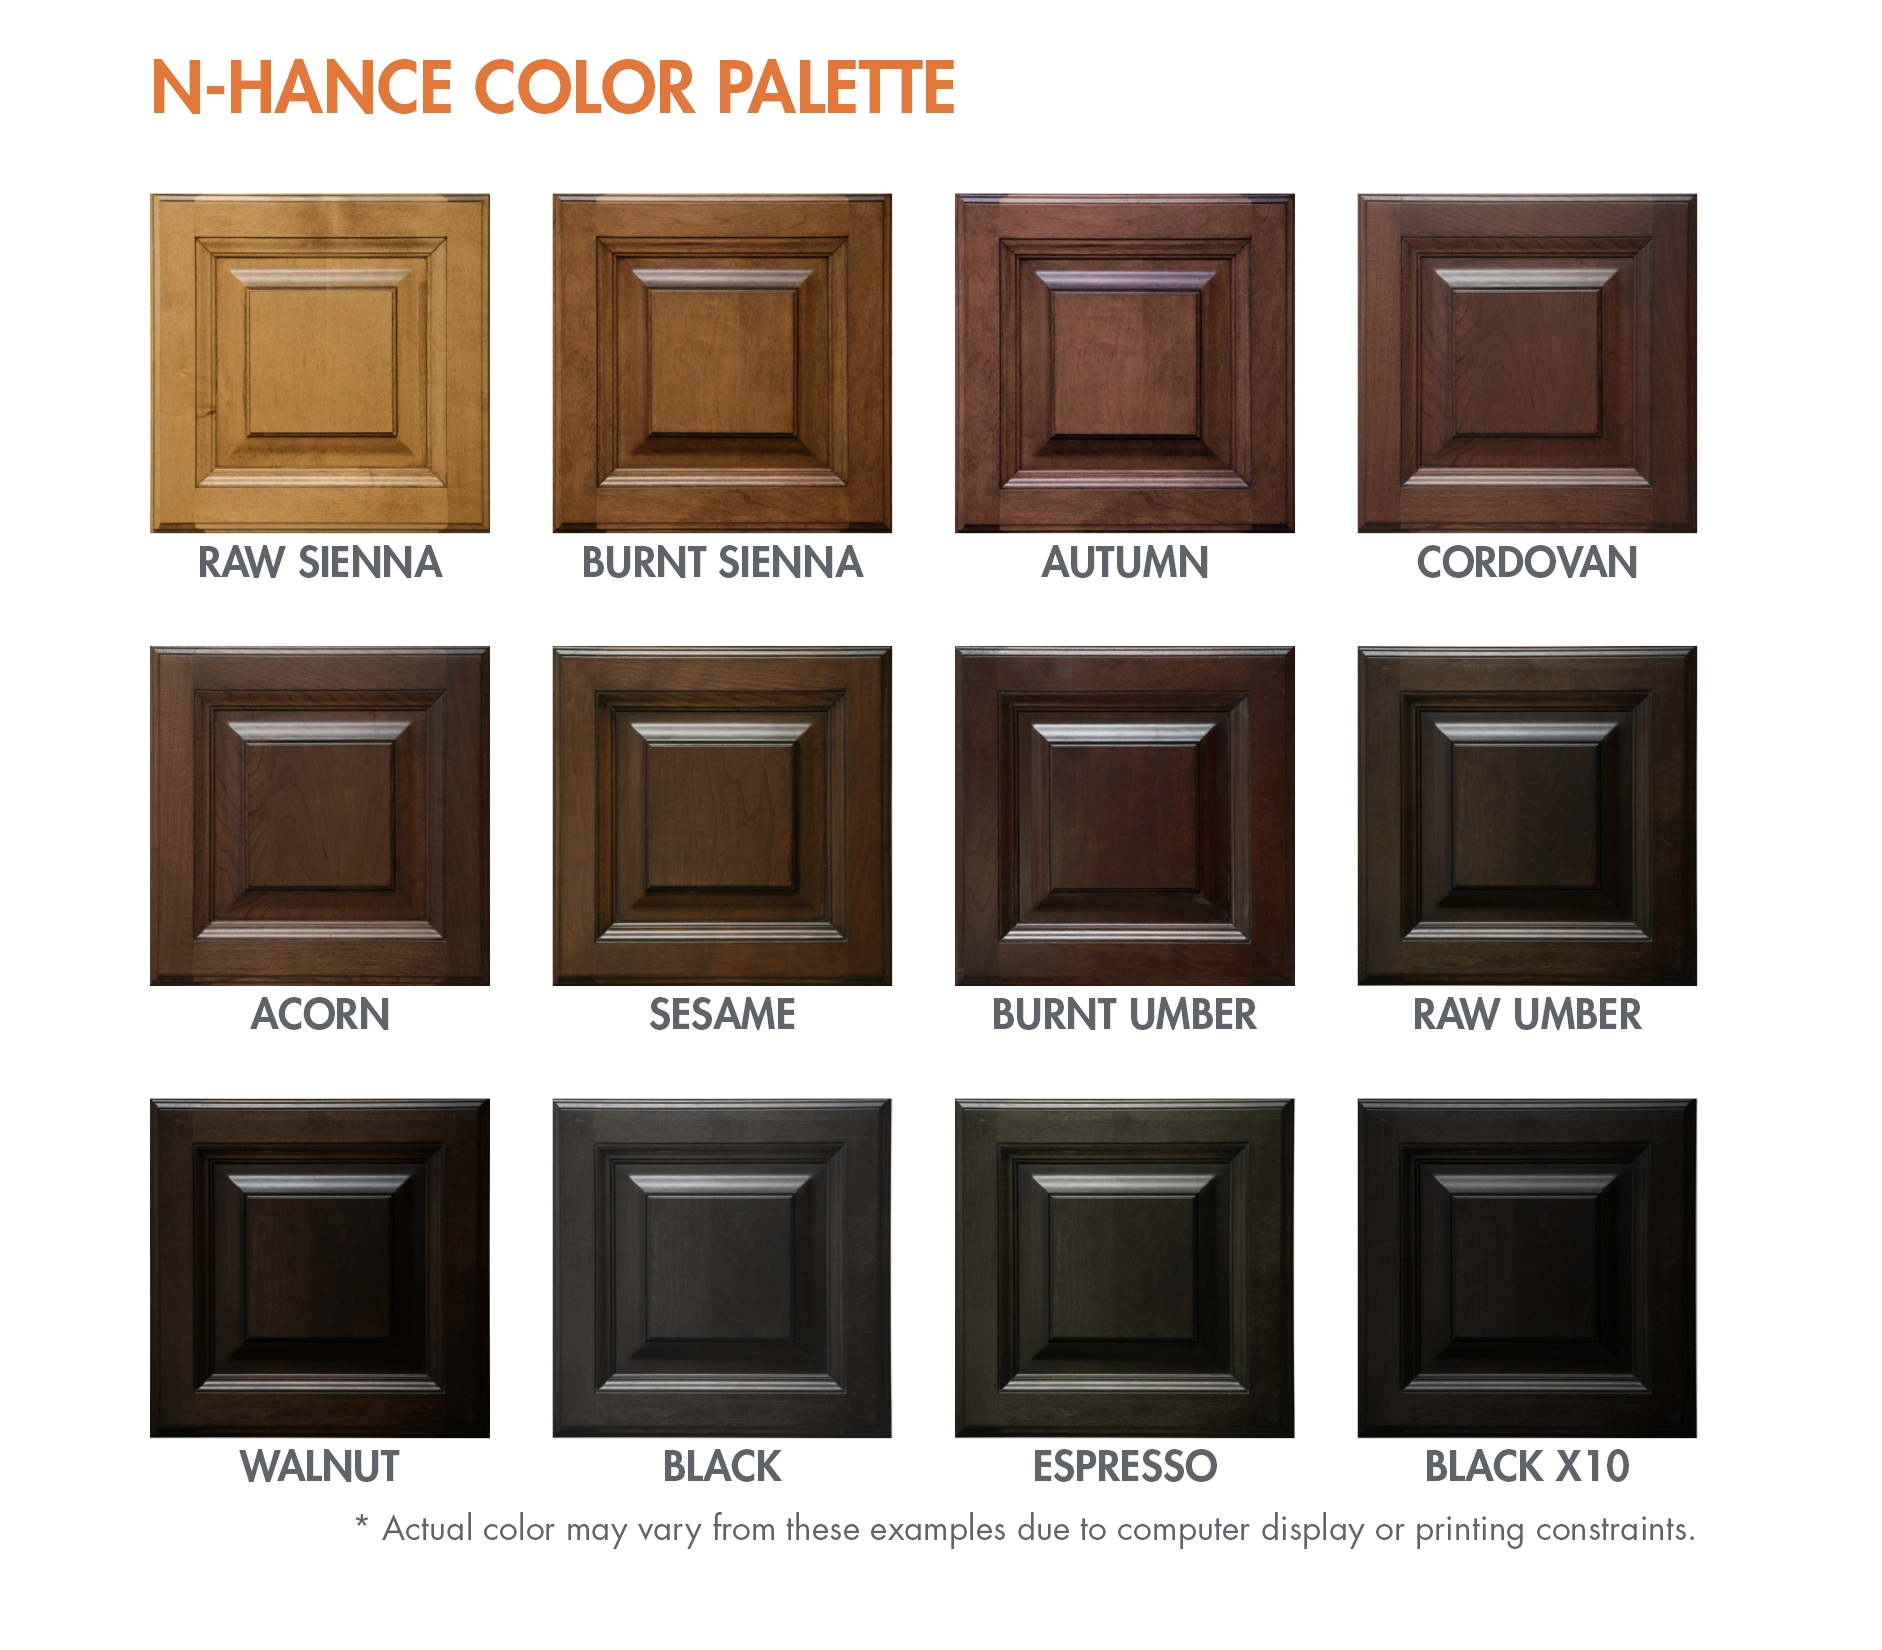 12 samples of cabinet doors stained in different colors in the N-Hance Color palette.